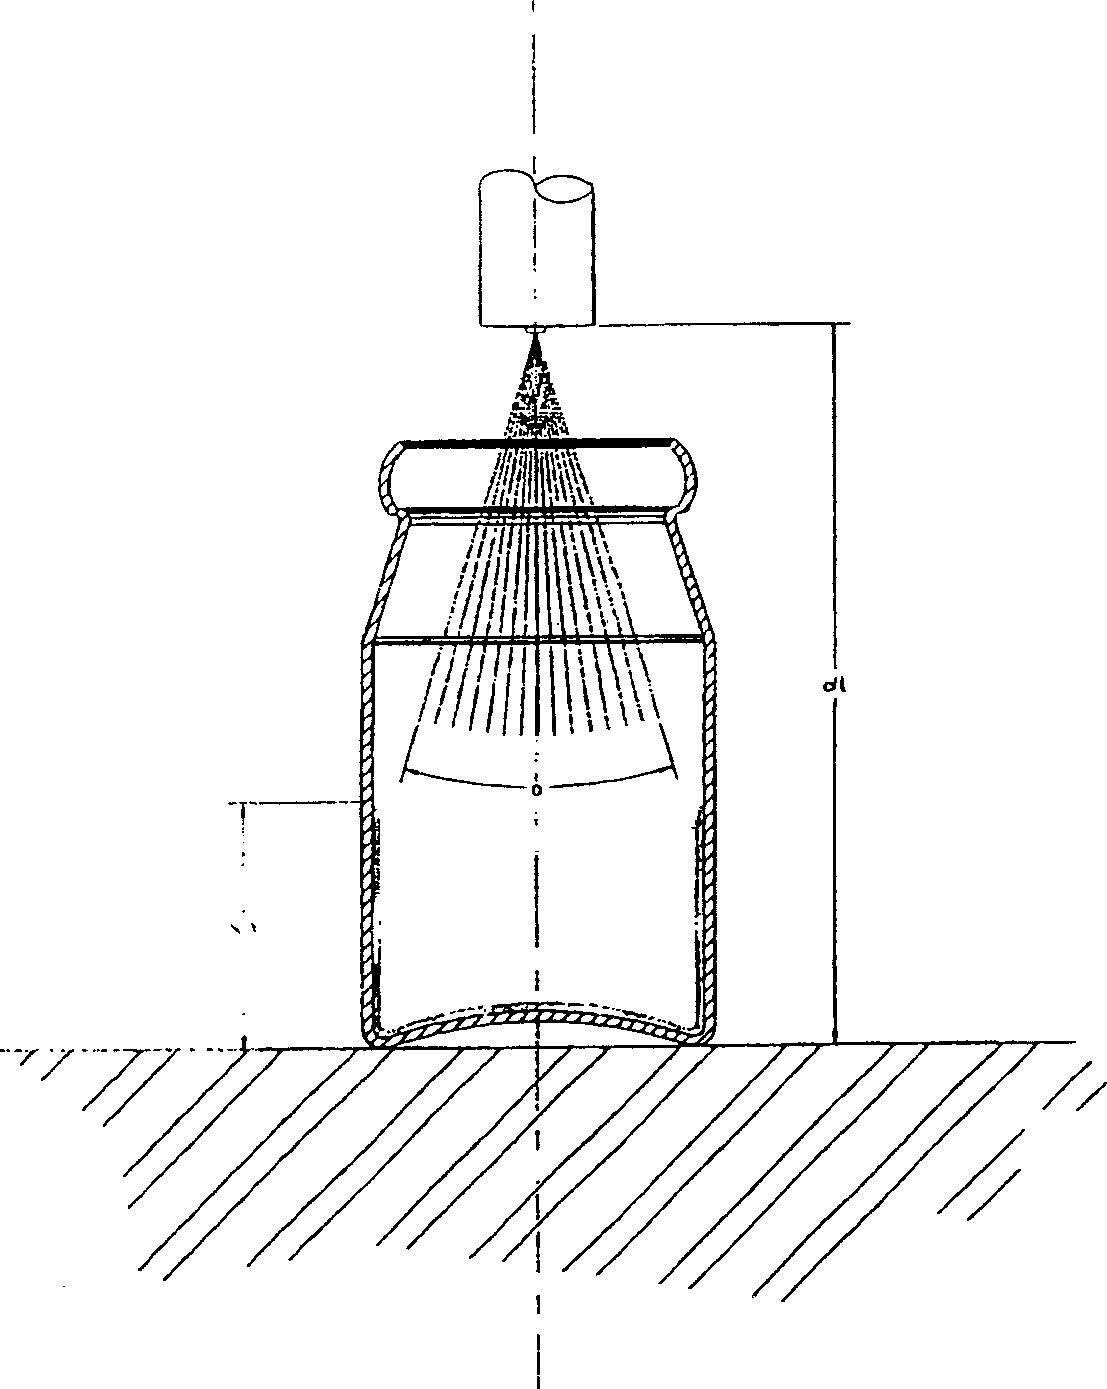 Method for applying polymer coating to internal surface of container